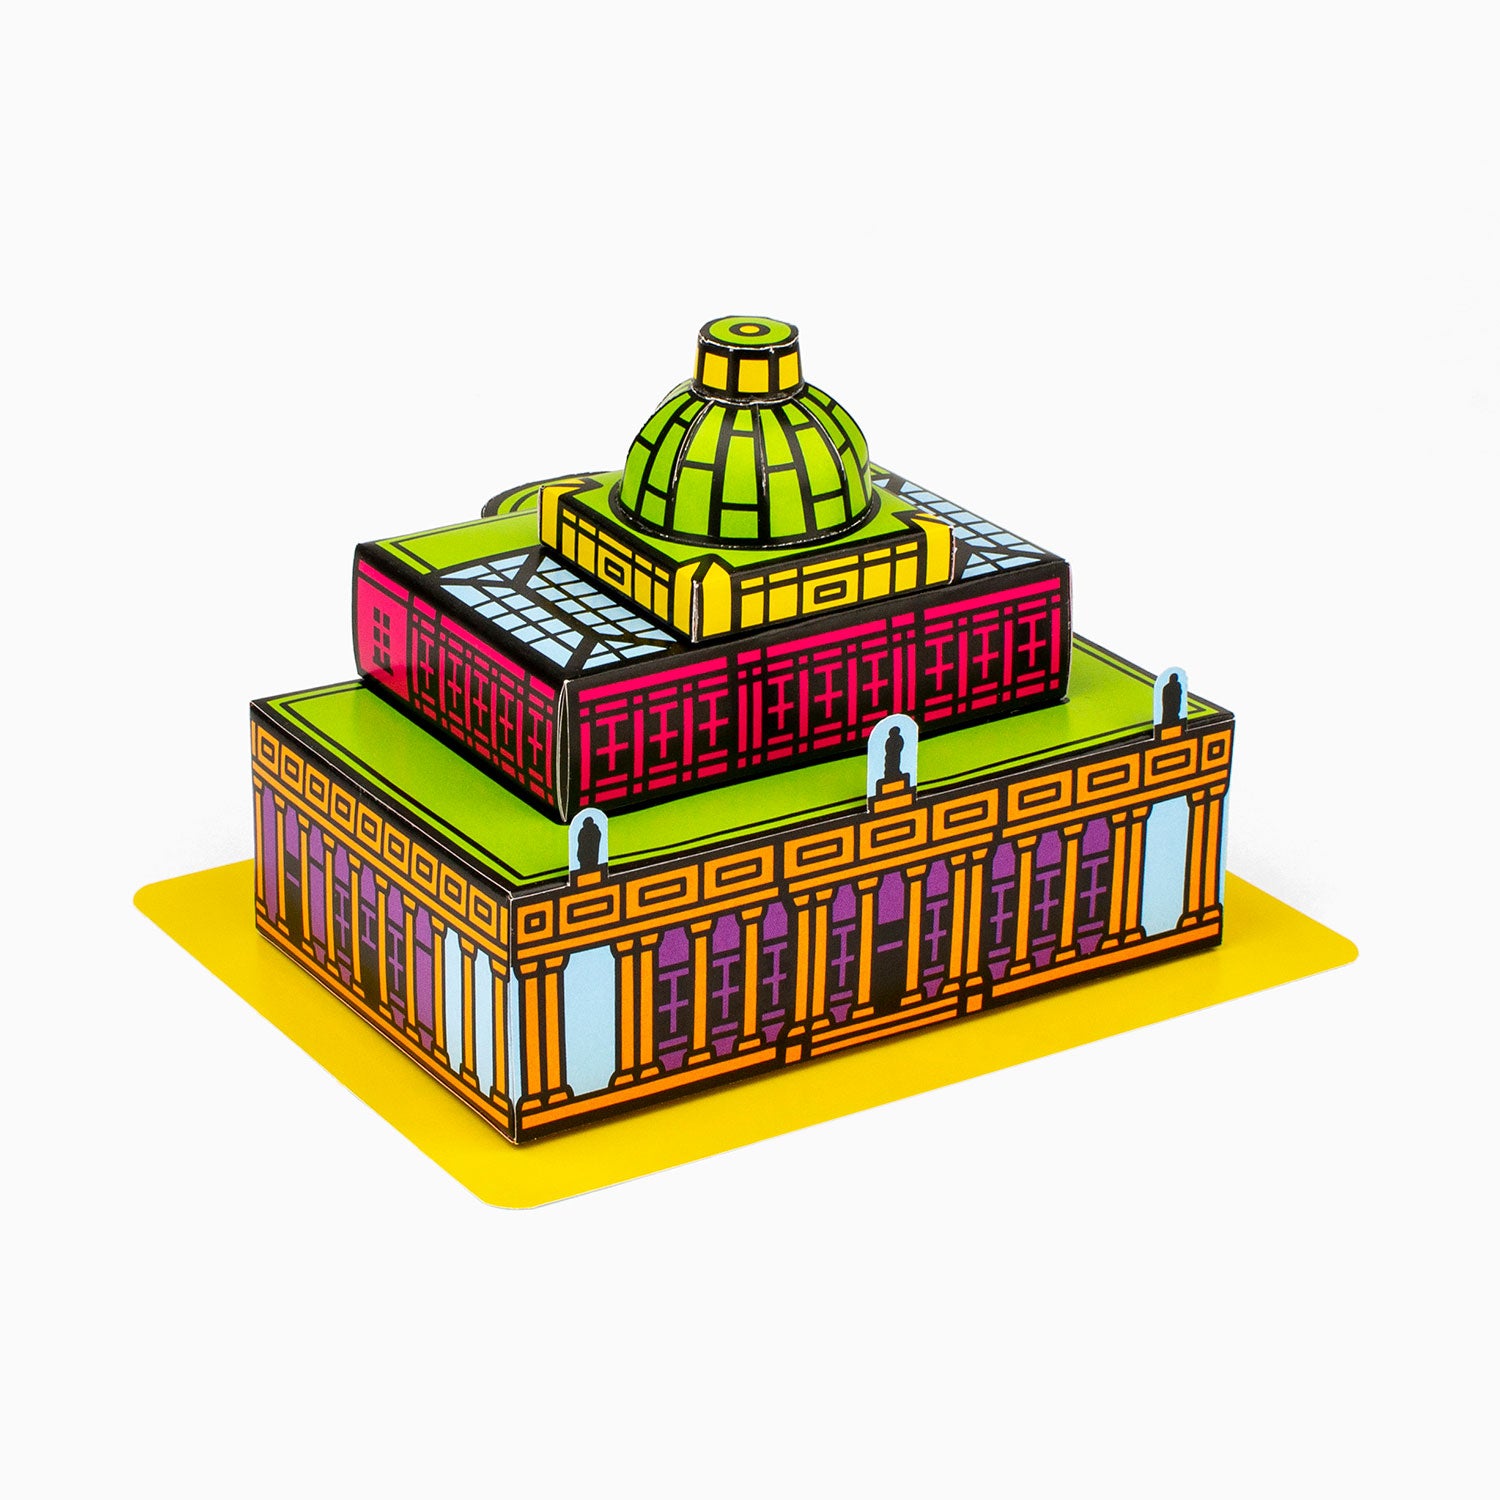 Foxetroo Cut-out Paper Model of Pittville Pump Room in Cheltenham